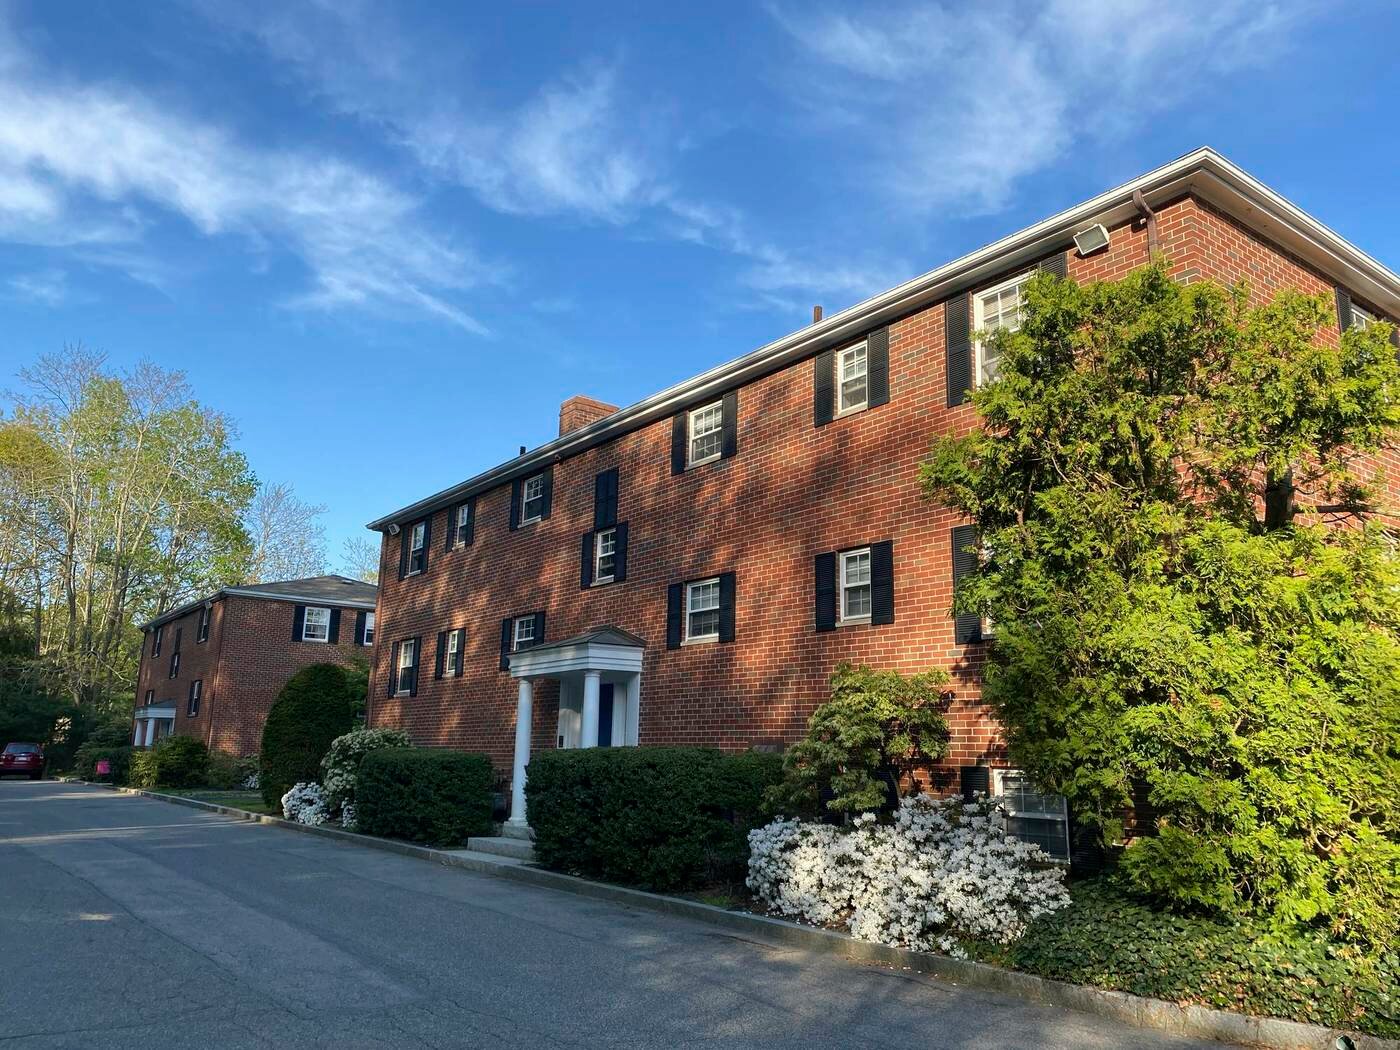 North Shore Community Development Coalition to purchase a 29-unit, multi-family complex of five buildings on Powder House Lane in Manchester for affordable housing.